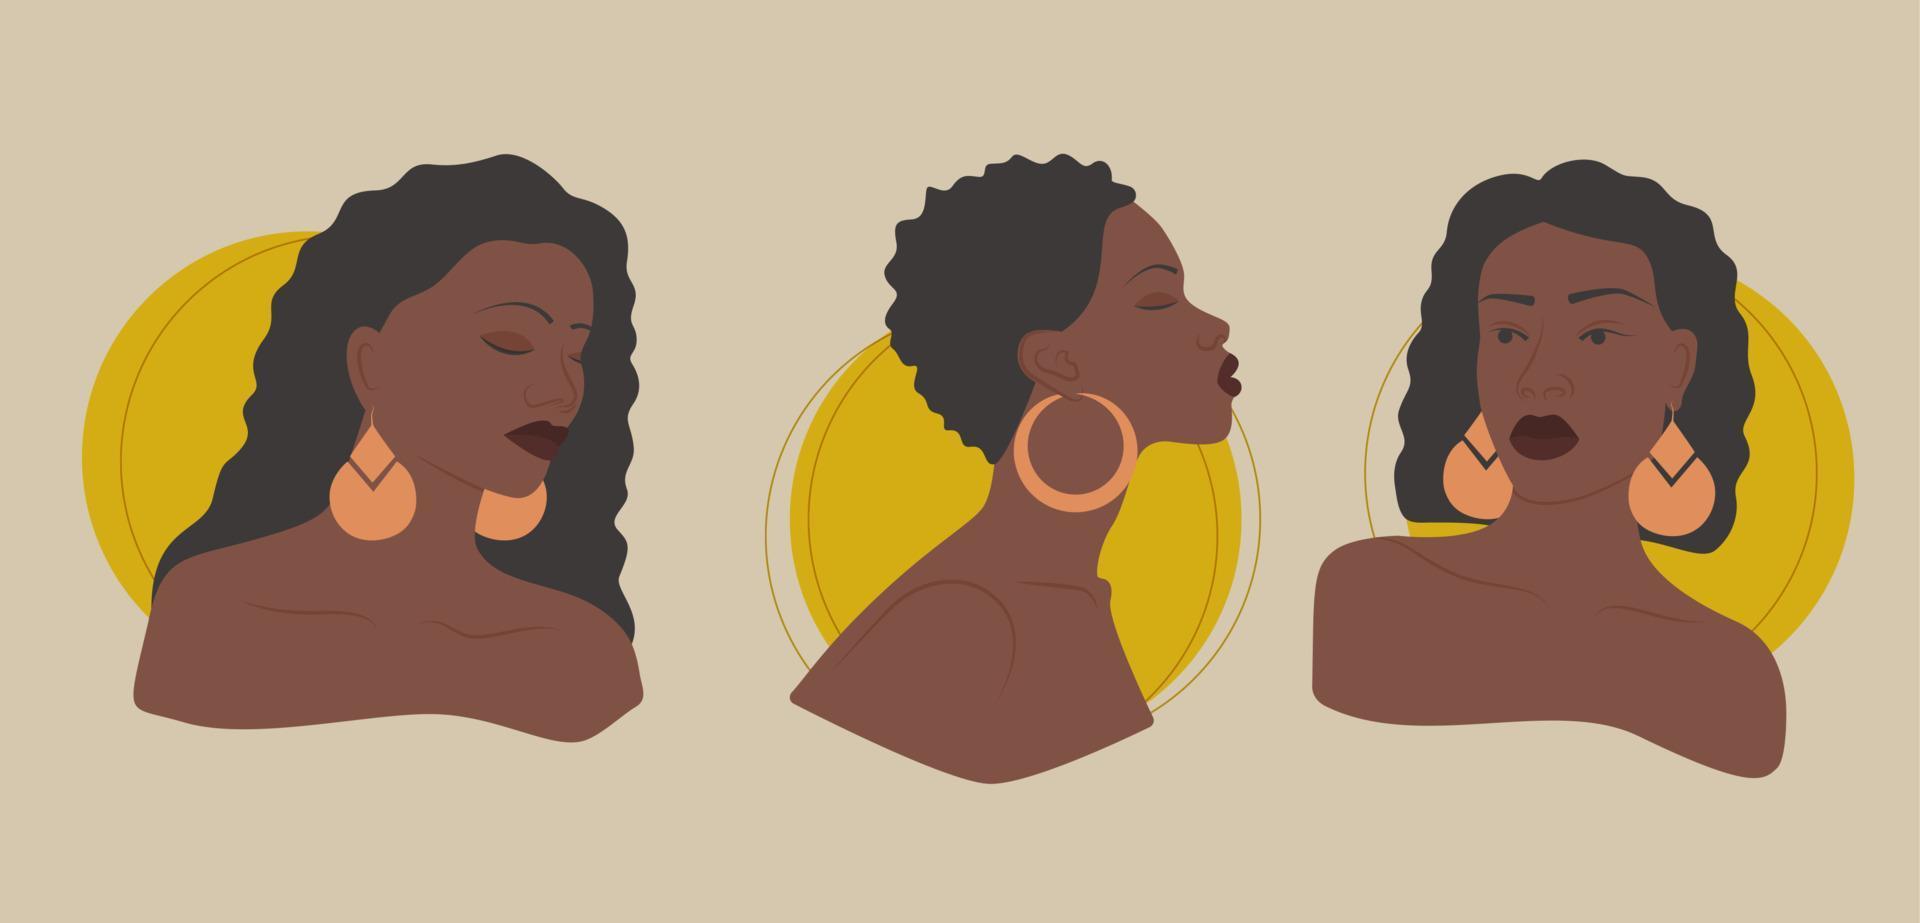 Set of young black women avatar, sun and african lady illustration. Girl power concept. Colored hand drawn vector illustration